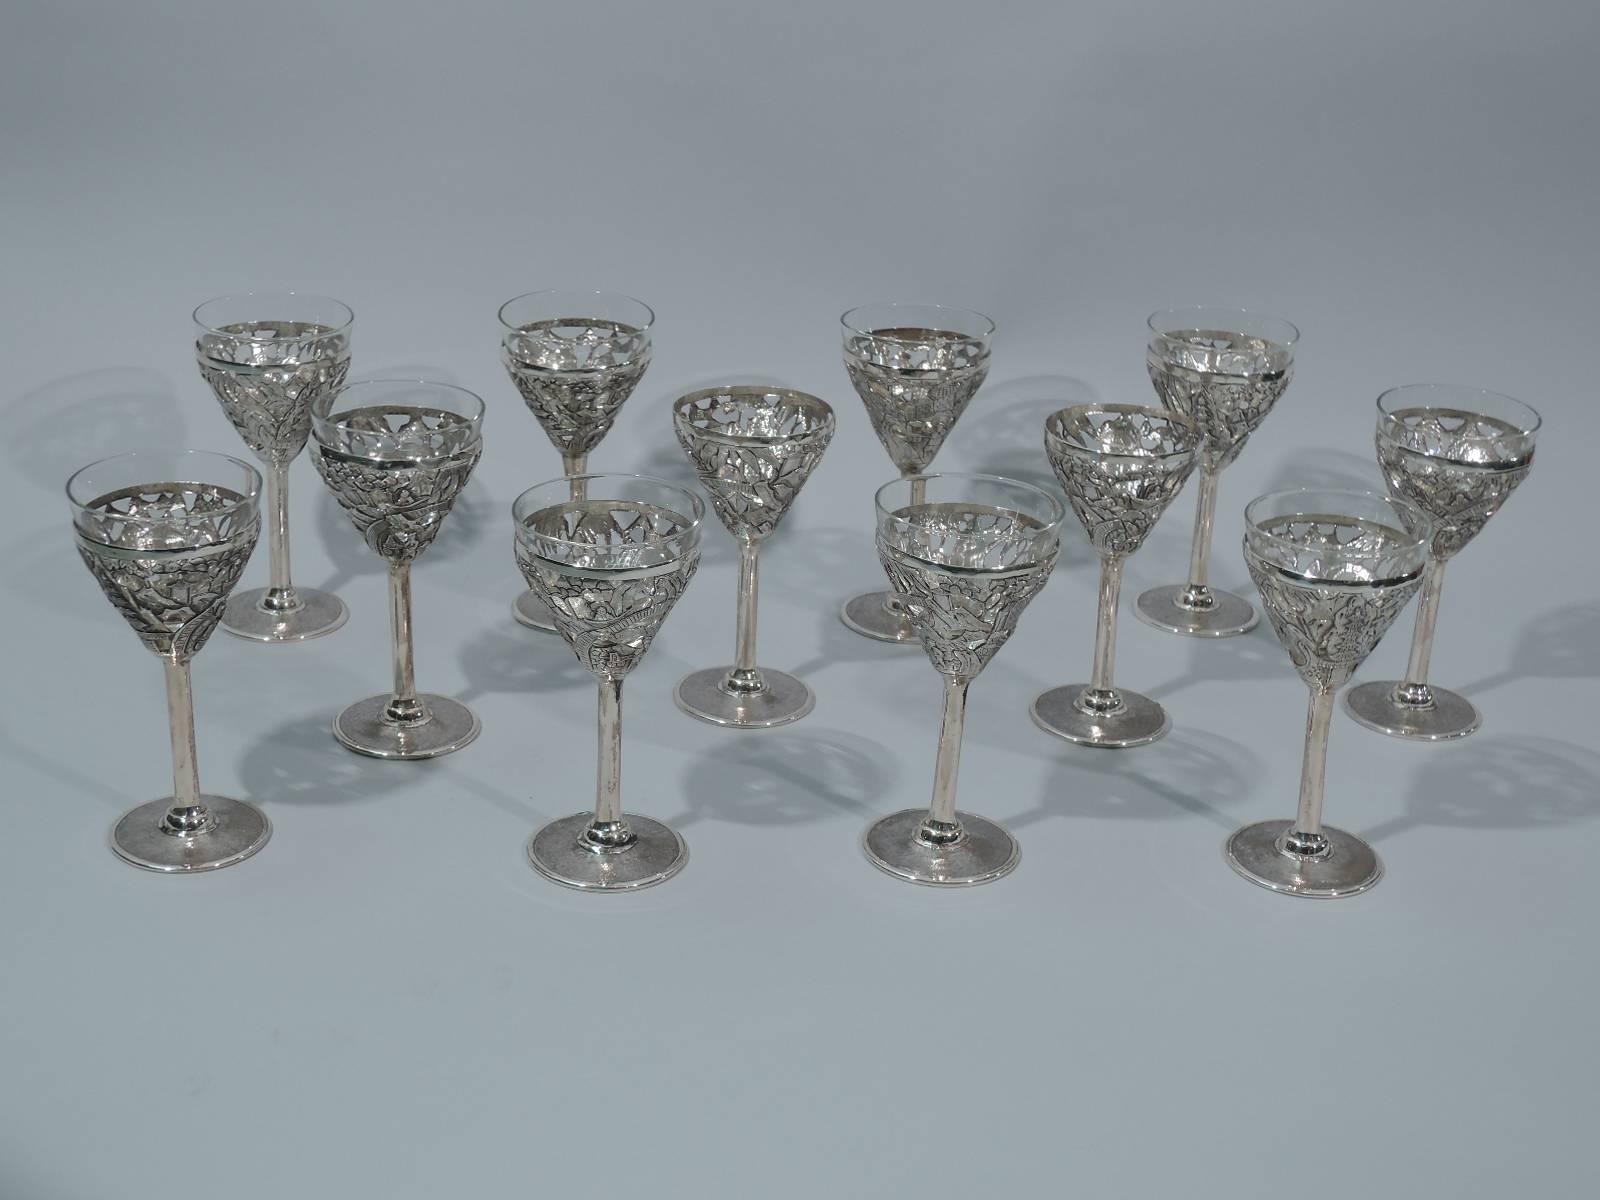 Set of ten Chinese export silver cocktail cups, circa 1910. Each: Pierced conical bowl, cylindrical stem, and flat circular foot. Bowl decorated with exotic pagodas, blossoming prunus branches, and rickshaw-pulling natives. Foot stippled. Clear